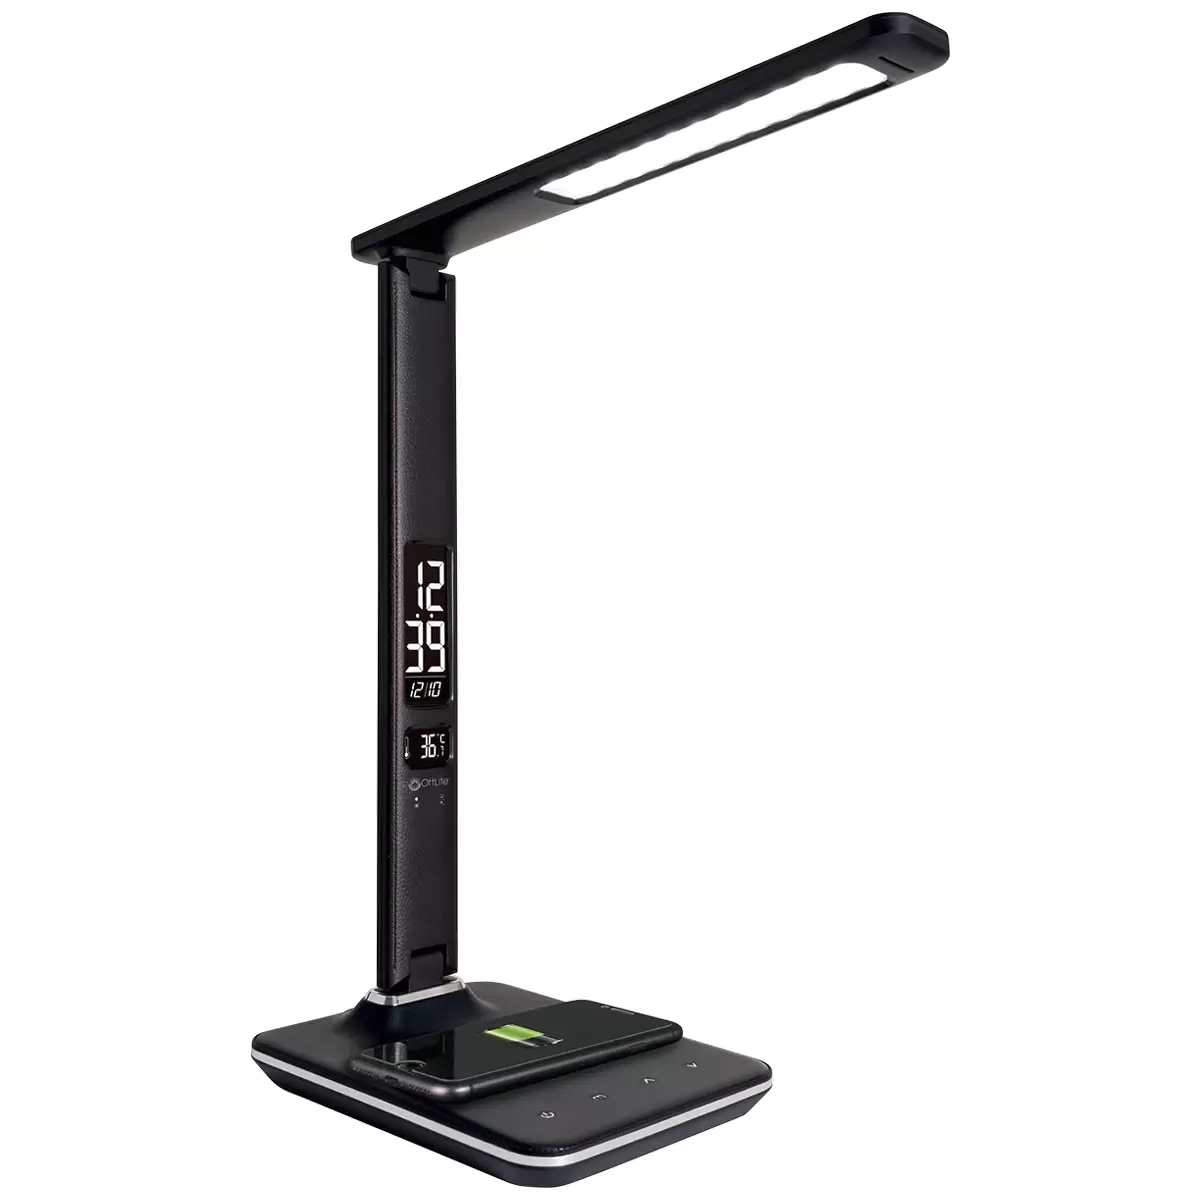 Ottlite Executive Desk Lamp with Wireless Charger and Sanitiser